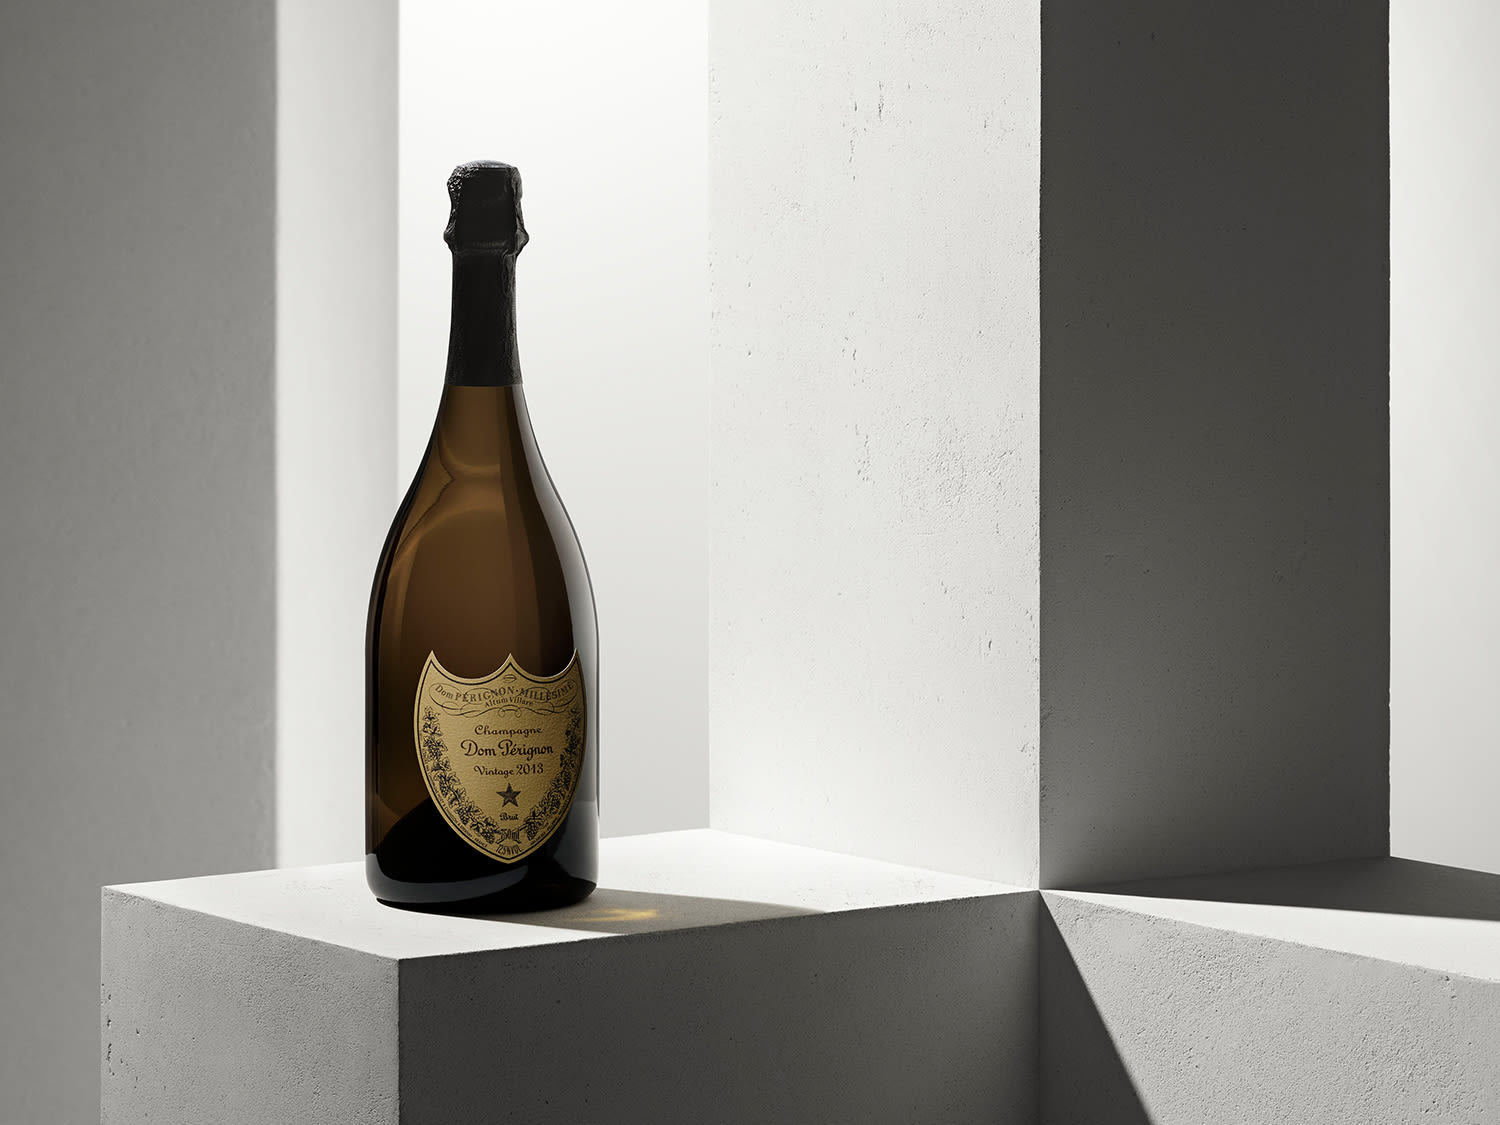 dinner with vintage, Moet its Perignon at debuts Luxury CNA Dom an 2013, champagne Hennessy exclusive - 28 Wilkie latest